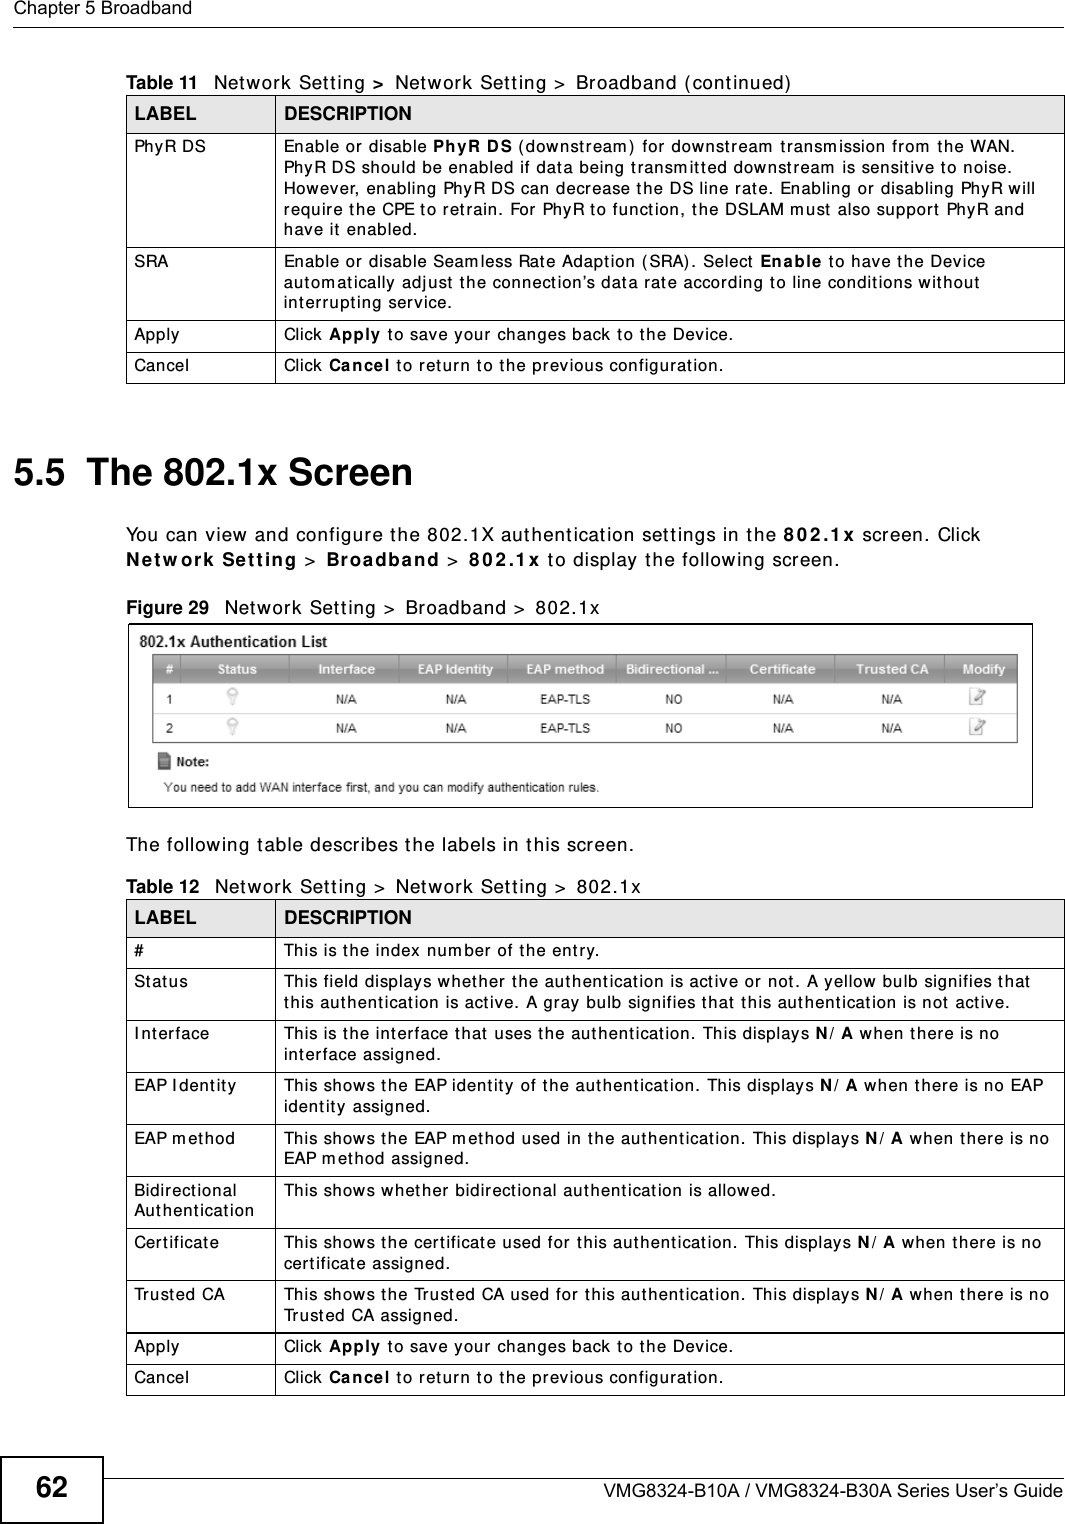 Chapter 5 BroadbandVMG8324-B10A / VMG8324-B30A Series User’s Guide625.5  The 802.1x ScreenYou can view and configure t he 802.1X aut hent icat ion set t ings in the 8 0 2 .1 x  screen. Click N e t w ork Se t t ing &gt;  Br oadba nd &gt;  8 0 2 .1 x  t o display t he following screen.Figure 29   Net work Set t ing &gt;  Broadband &gt;  802.1xThe following t able describes t he labels in this screen. PhyR DS Enable or disable PhyR D S ( downst ream )  for downstream  t ransm ission from  the WAN. PhyR DS should be enabled if data being transm itted downstream  is sensit ive t o noise. However, enabling PhyR DS can decrease t he DS line rate. Enabling or  disabling PhyR w ill require the CPE t o ret rain. For PhyR t o function, t he DSLAM m ust  also suppor t  PhyR and have it  enabled.SRA Enable or disable Seam less Rat e Adaption (SRA) . Select  En a ble t o have the Device autom at ically adj ust  t he connection’s dat a rat e accor ding t o line conditions wit hout  int errupting serv ice.Apply Click Apply t o save your changes back t o t he Device.Cancel Click Ca nce l to ret urn to t he previous configurat ion.Table 11   Net work Set t ing &gt;  Net work Set t ing &gt;  Broadband ( cont inued)LABEL DESCRIPTIONTable 12   Net work Sett ing &gt;  Net work Sett ing &gt;  802.1xLABEL DESCRIPTION# This is the index num ber of t he ent r y.St at us  This field displays whet her t he authent icat ion is act ive or not. A yellow  bulb signifies t hat  this aut henticat ion is active. A gray bulb signifies that this aut hent ication is not  active.I nterface This is the interface t hat  uses the aut hent ication. This displays N / A when t here is no int erface assigned.EAP I dent it y This shows t he EAP ident ity of the authent icat ion. This displays N / A when t here is no EAP ident it y  assigned.EAP m et hod This shows t he EAP m et hod used in t he authent icat ion. This displays N / A when t here is no EAP m et hod assigned.Bidir ect ional Au t hen t icat ionThis shows w het her bidirect ional aut hent icat ion is allow ed. Cert ificate This shows t he cert ificate used for t his authent icat ion. This displays N / A when ther e is no cer t ificate assigned.Trust ed CA This shows t he Trust ed CA used for this aut hent ication. This displays N / A when t here is no Trust ed CA assigned.Apply Click Apply t o save your changes back t o t he Device.Cancel Click Ca nce l to ret urn to t he previous configurat ion.